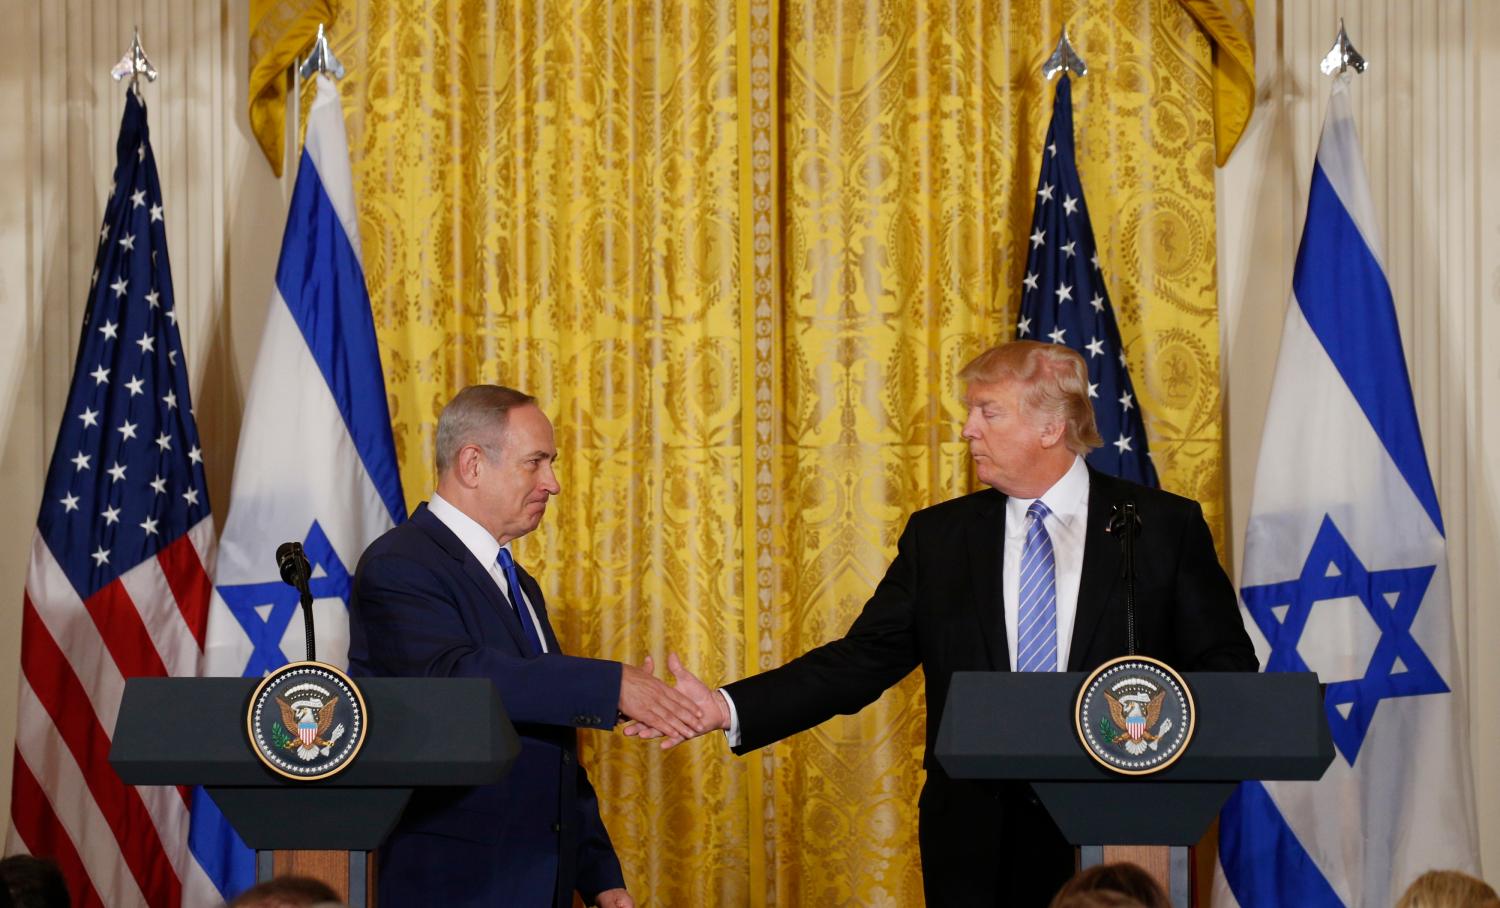 U.S. President Donald Trump (R) greets Israeli Prime Minister Benjamin Netanyahu after a joint news conference at the White House in Washington, U.S., February 15, 2017. REUTERS/Kevin Lamarque - RTSYUDS